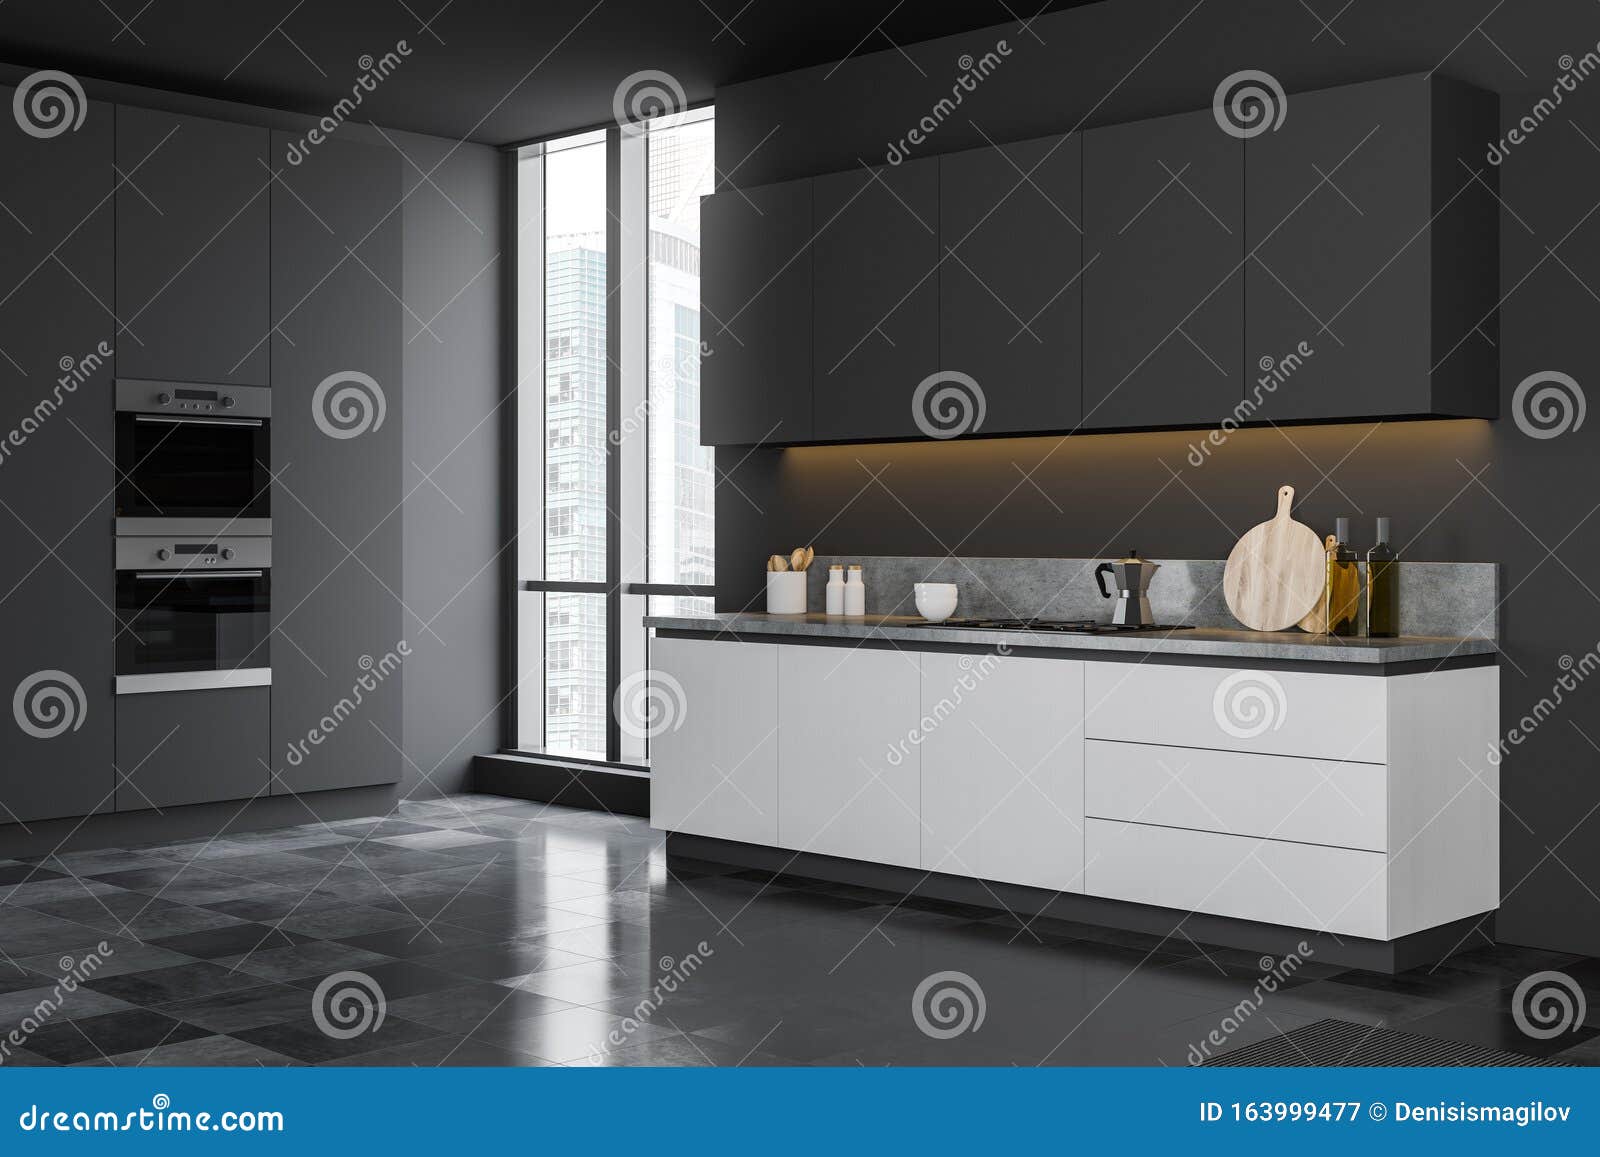 Gray Kitchen Corner With White Counters Stock Illustration